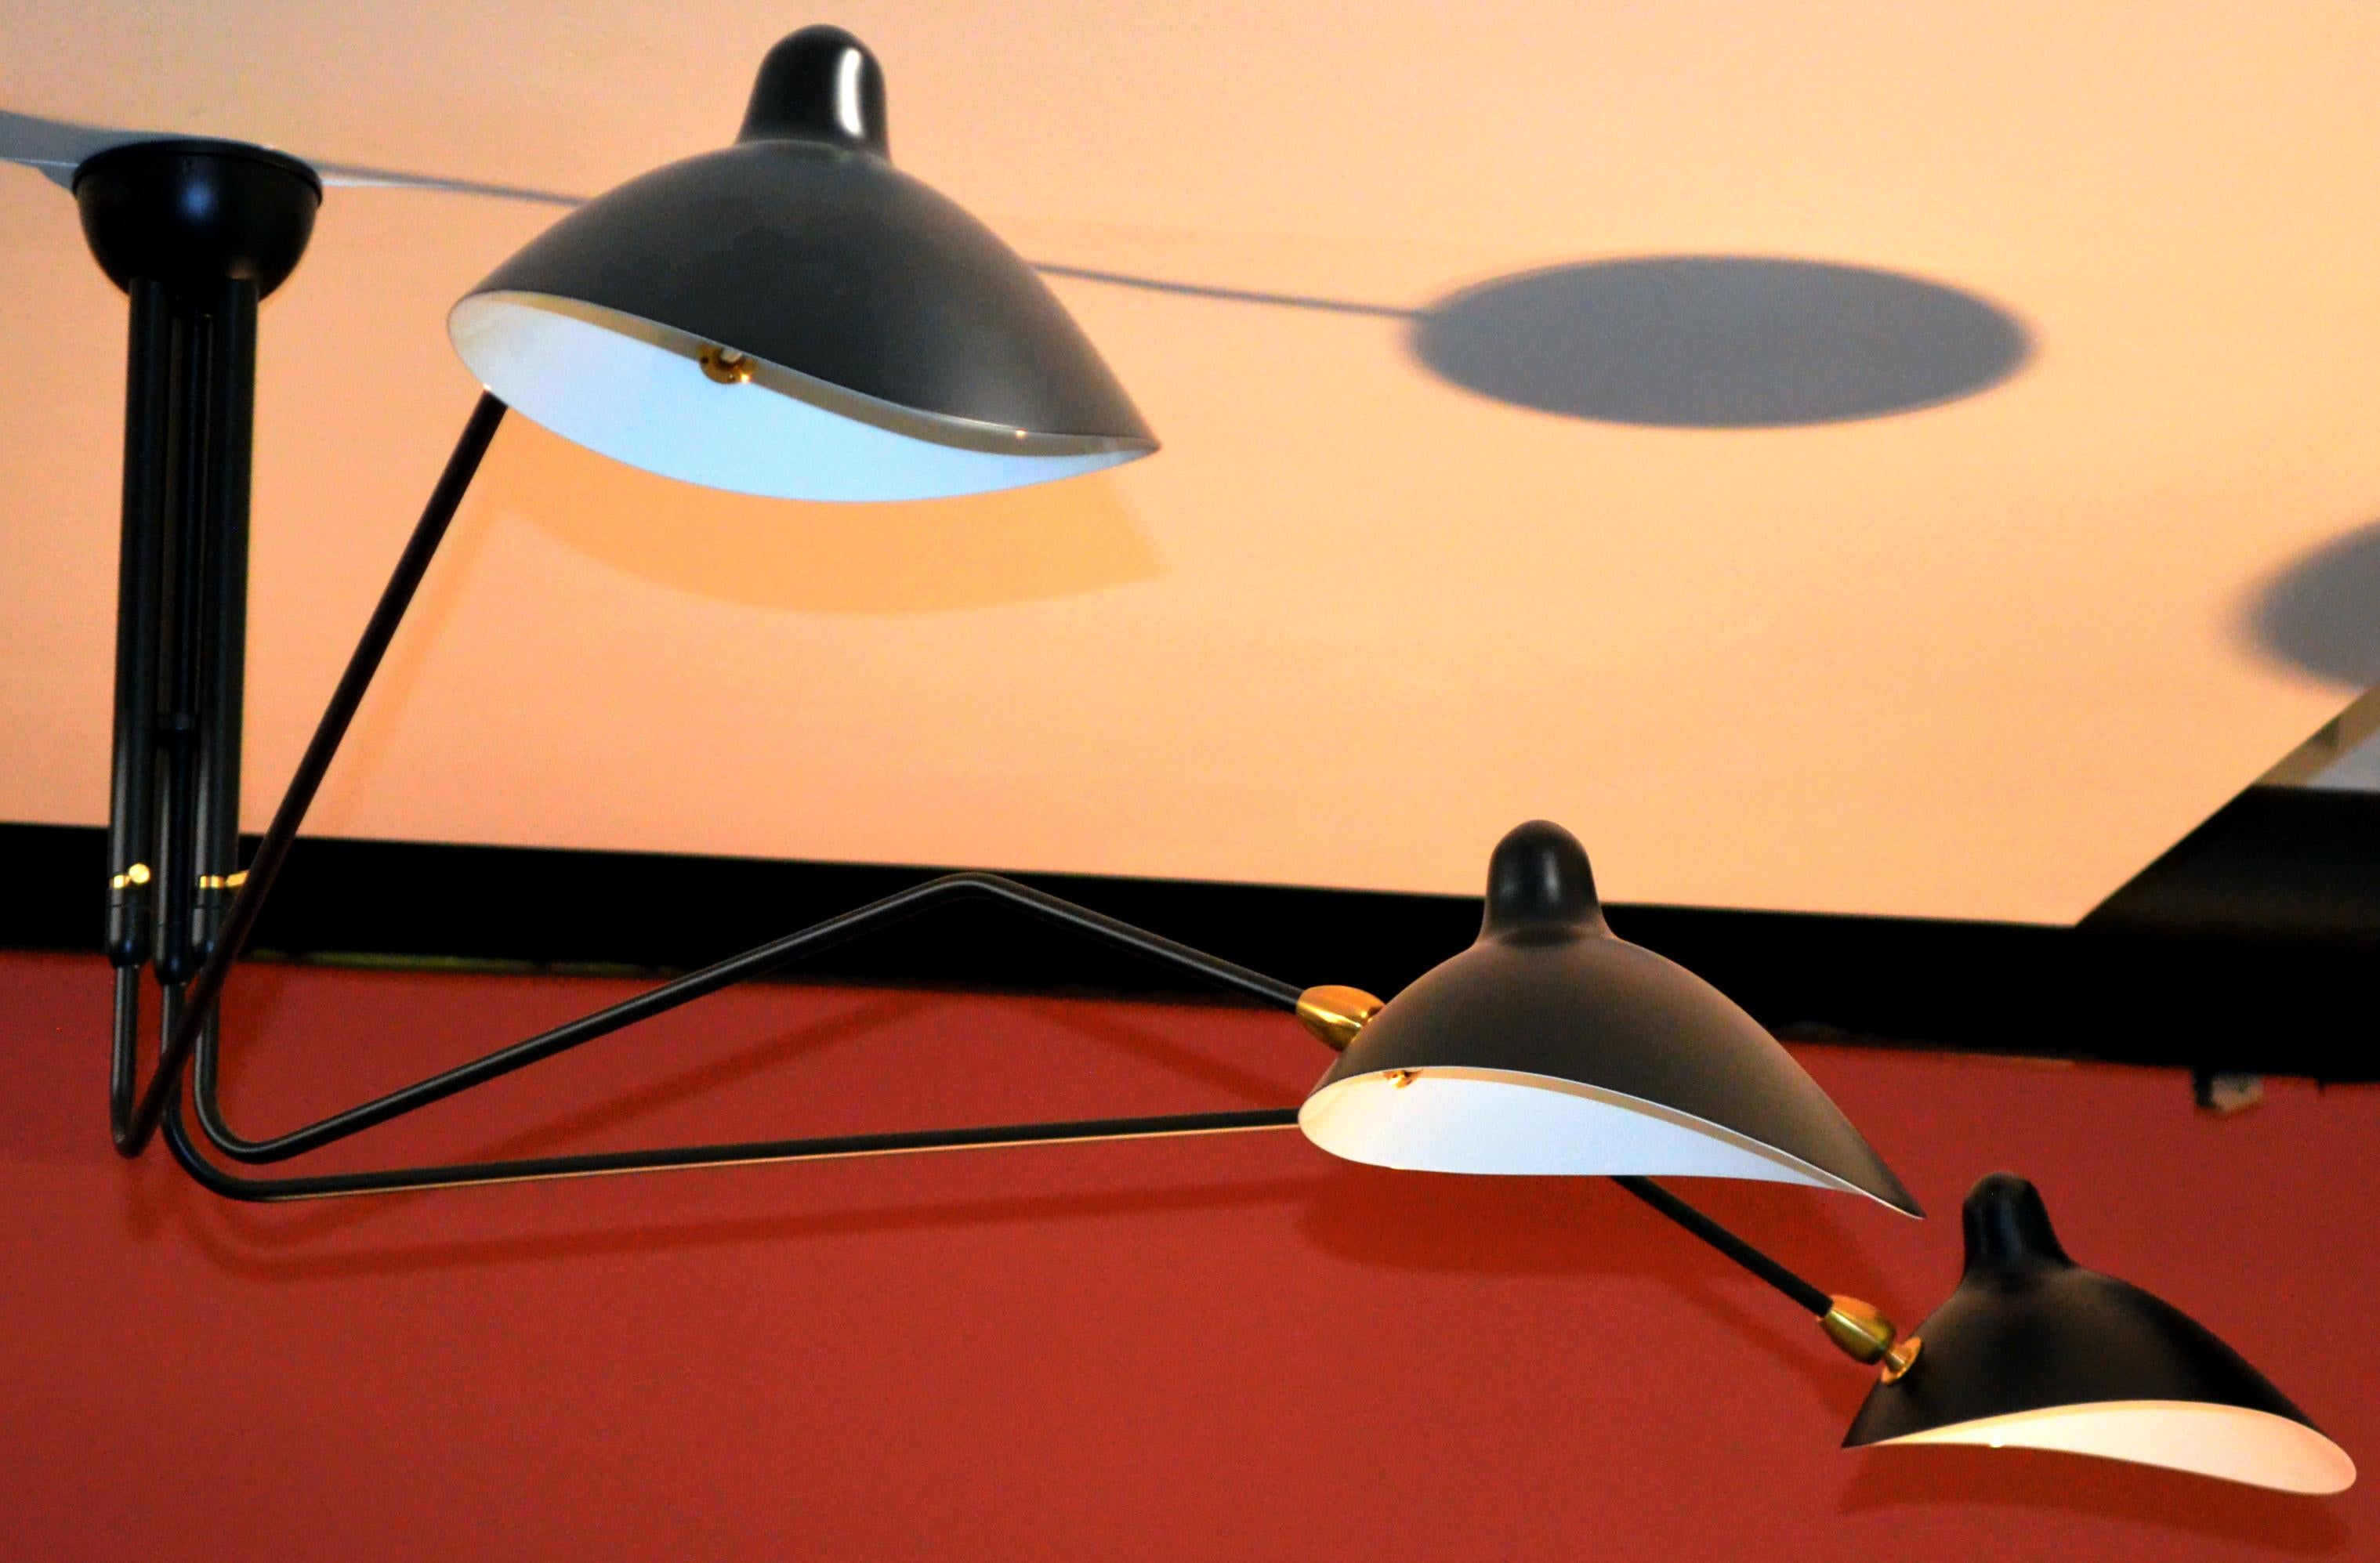 Contemporary Serge Mouille - Ceiling Lamp with 3 Rotating Arms in Black - IN STOCK! For Sale